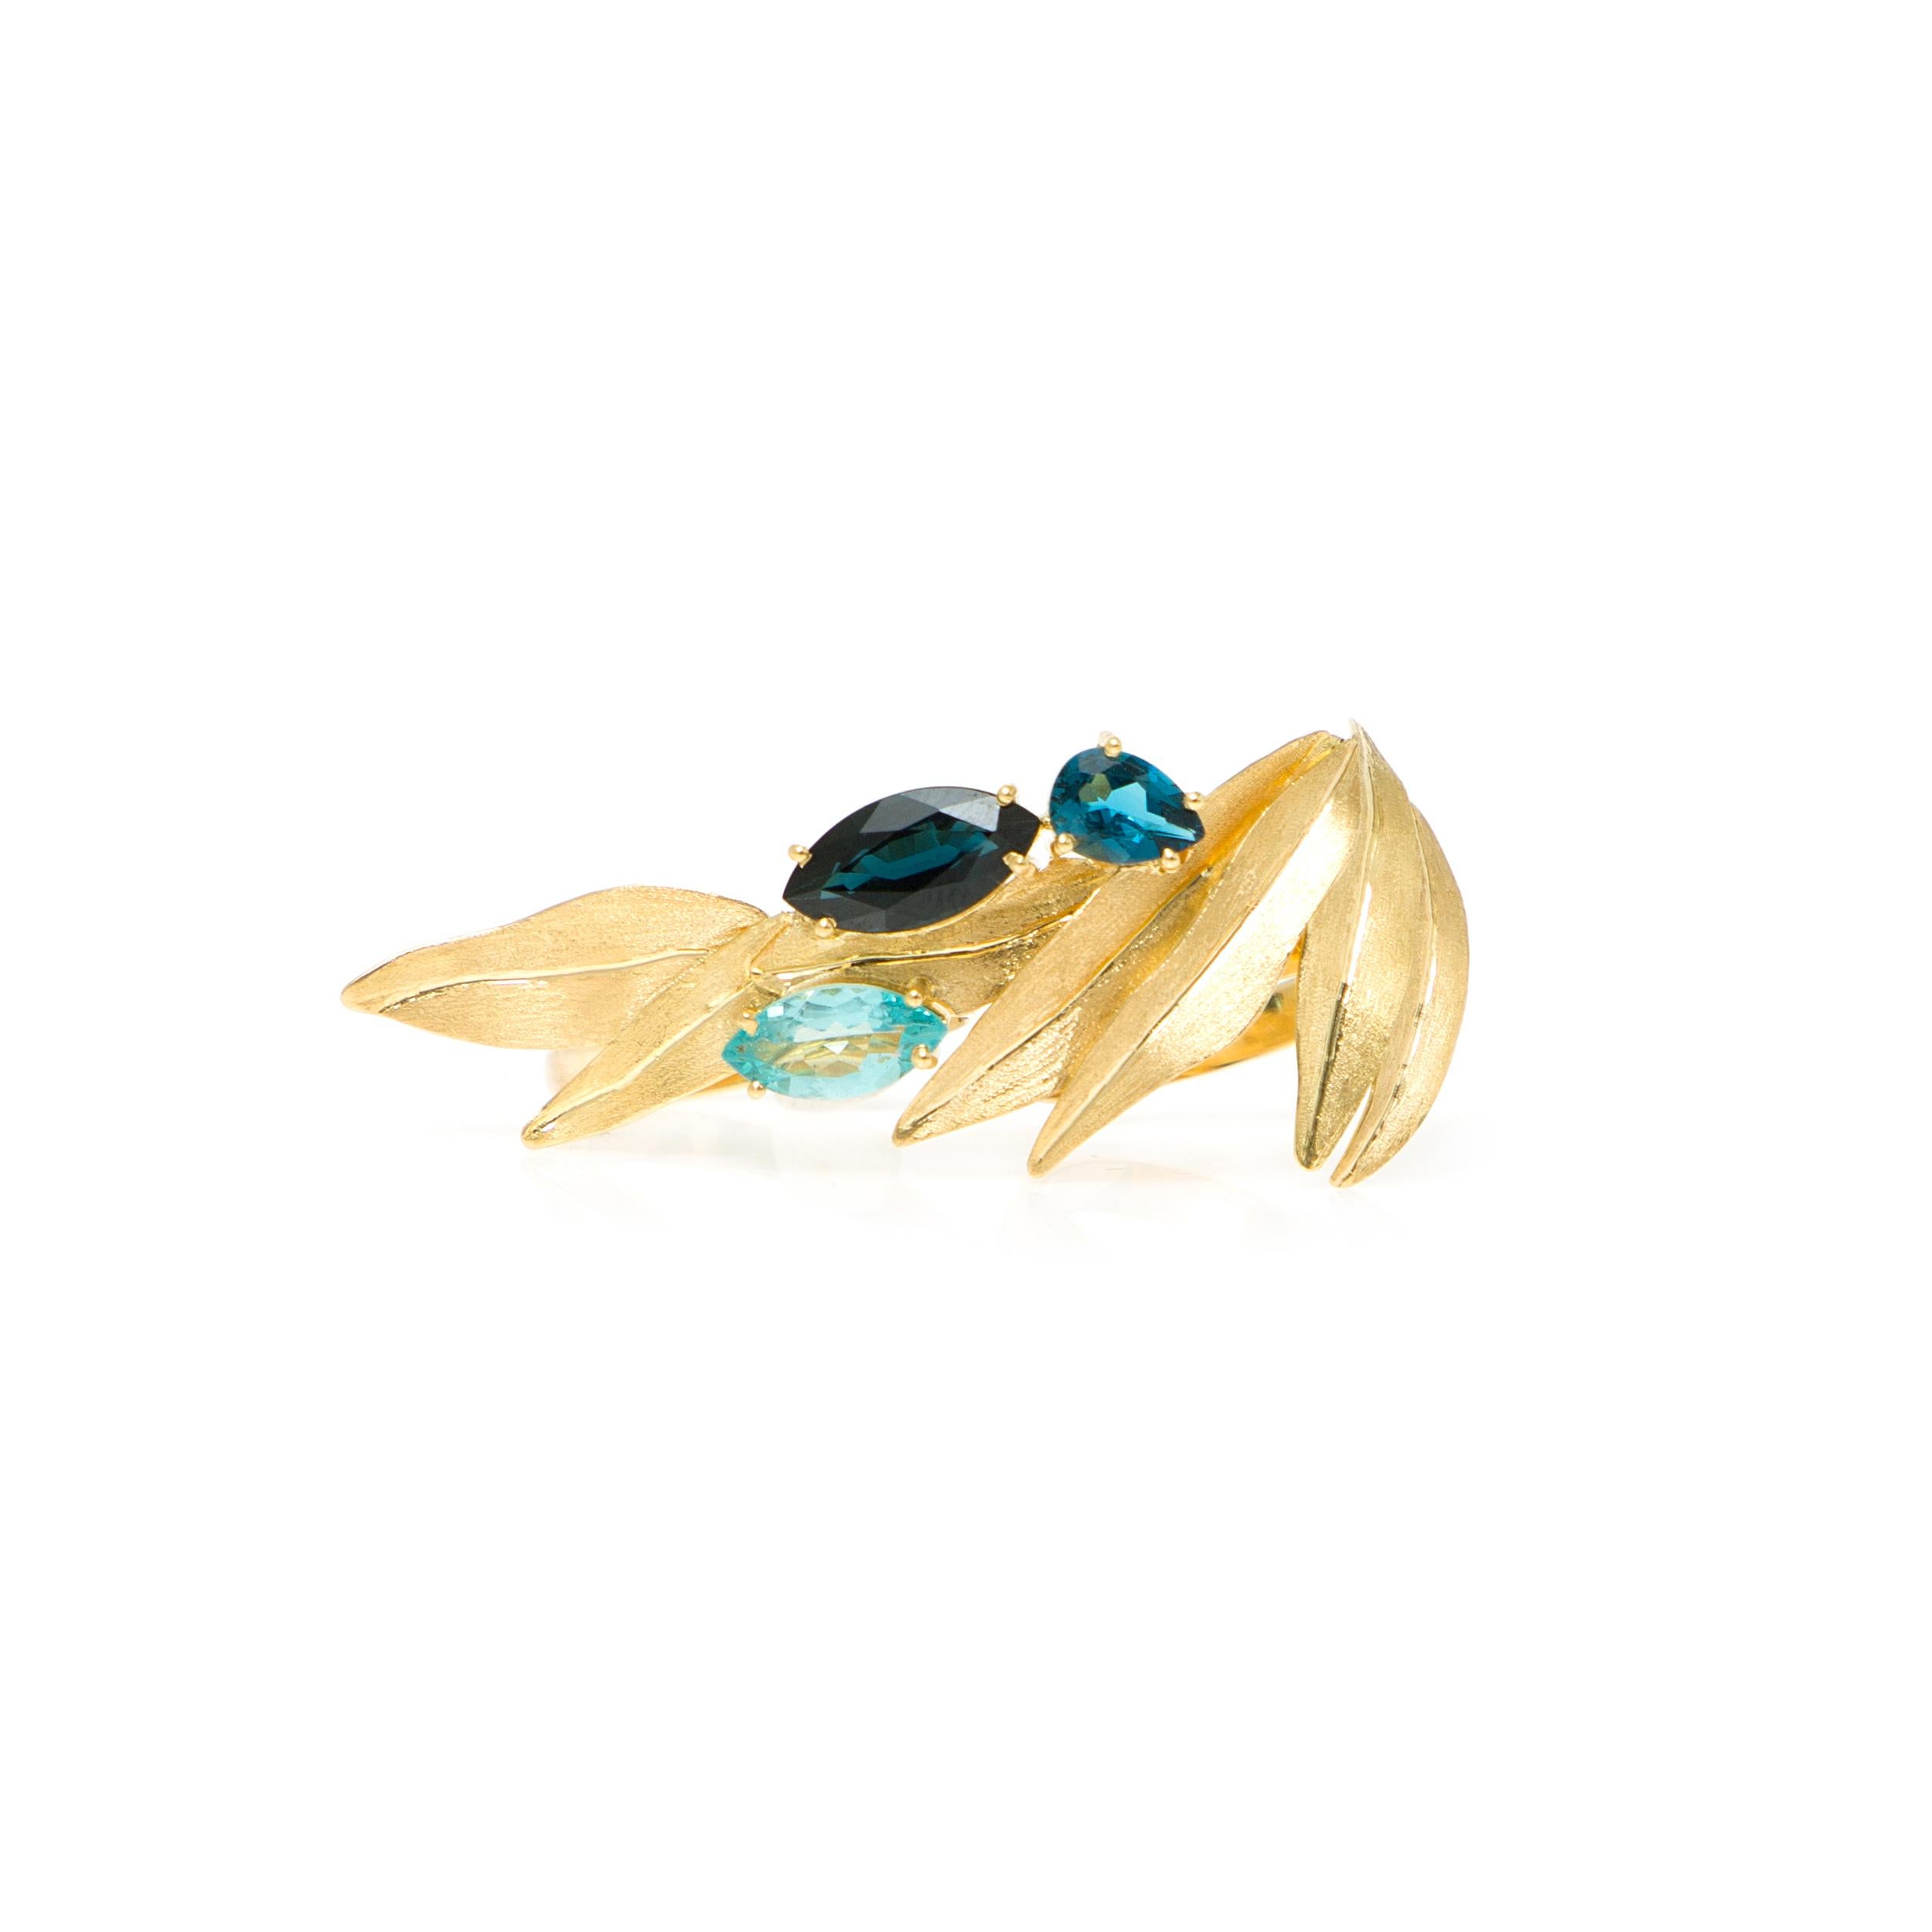 Double Ring 
Sizes: 7.25 and 7.5 (US)
Gold 18K
Blue Sapphire, Blue Topaz (London and Sky)
Handmade, matte finish and prong setting

Van Gogh Irises Ring have blue flowers with sword shaped leaves that are long and laminar.  The flowers are